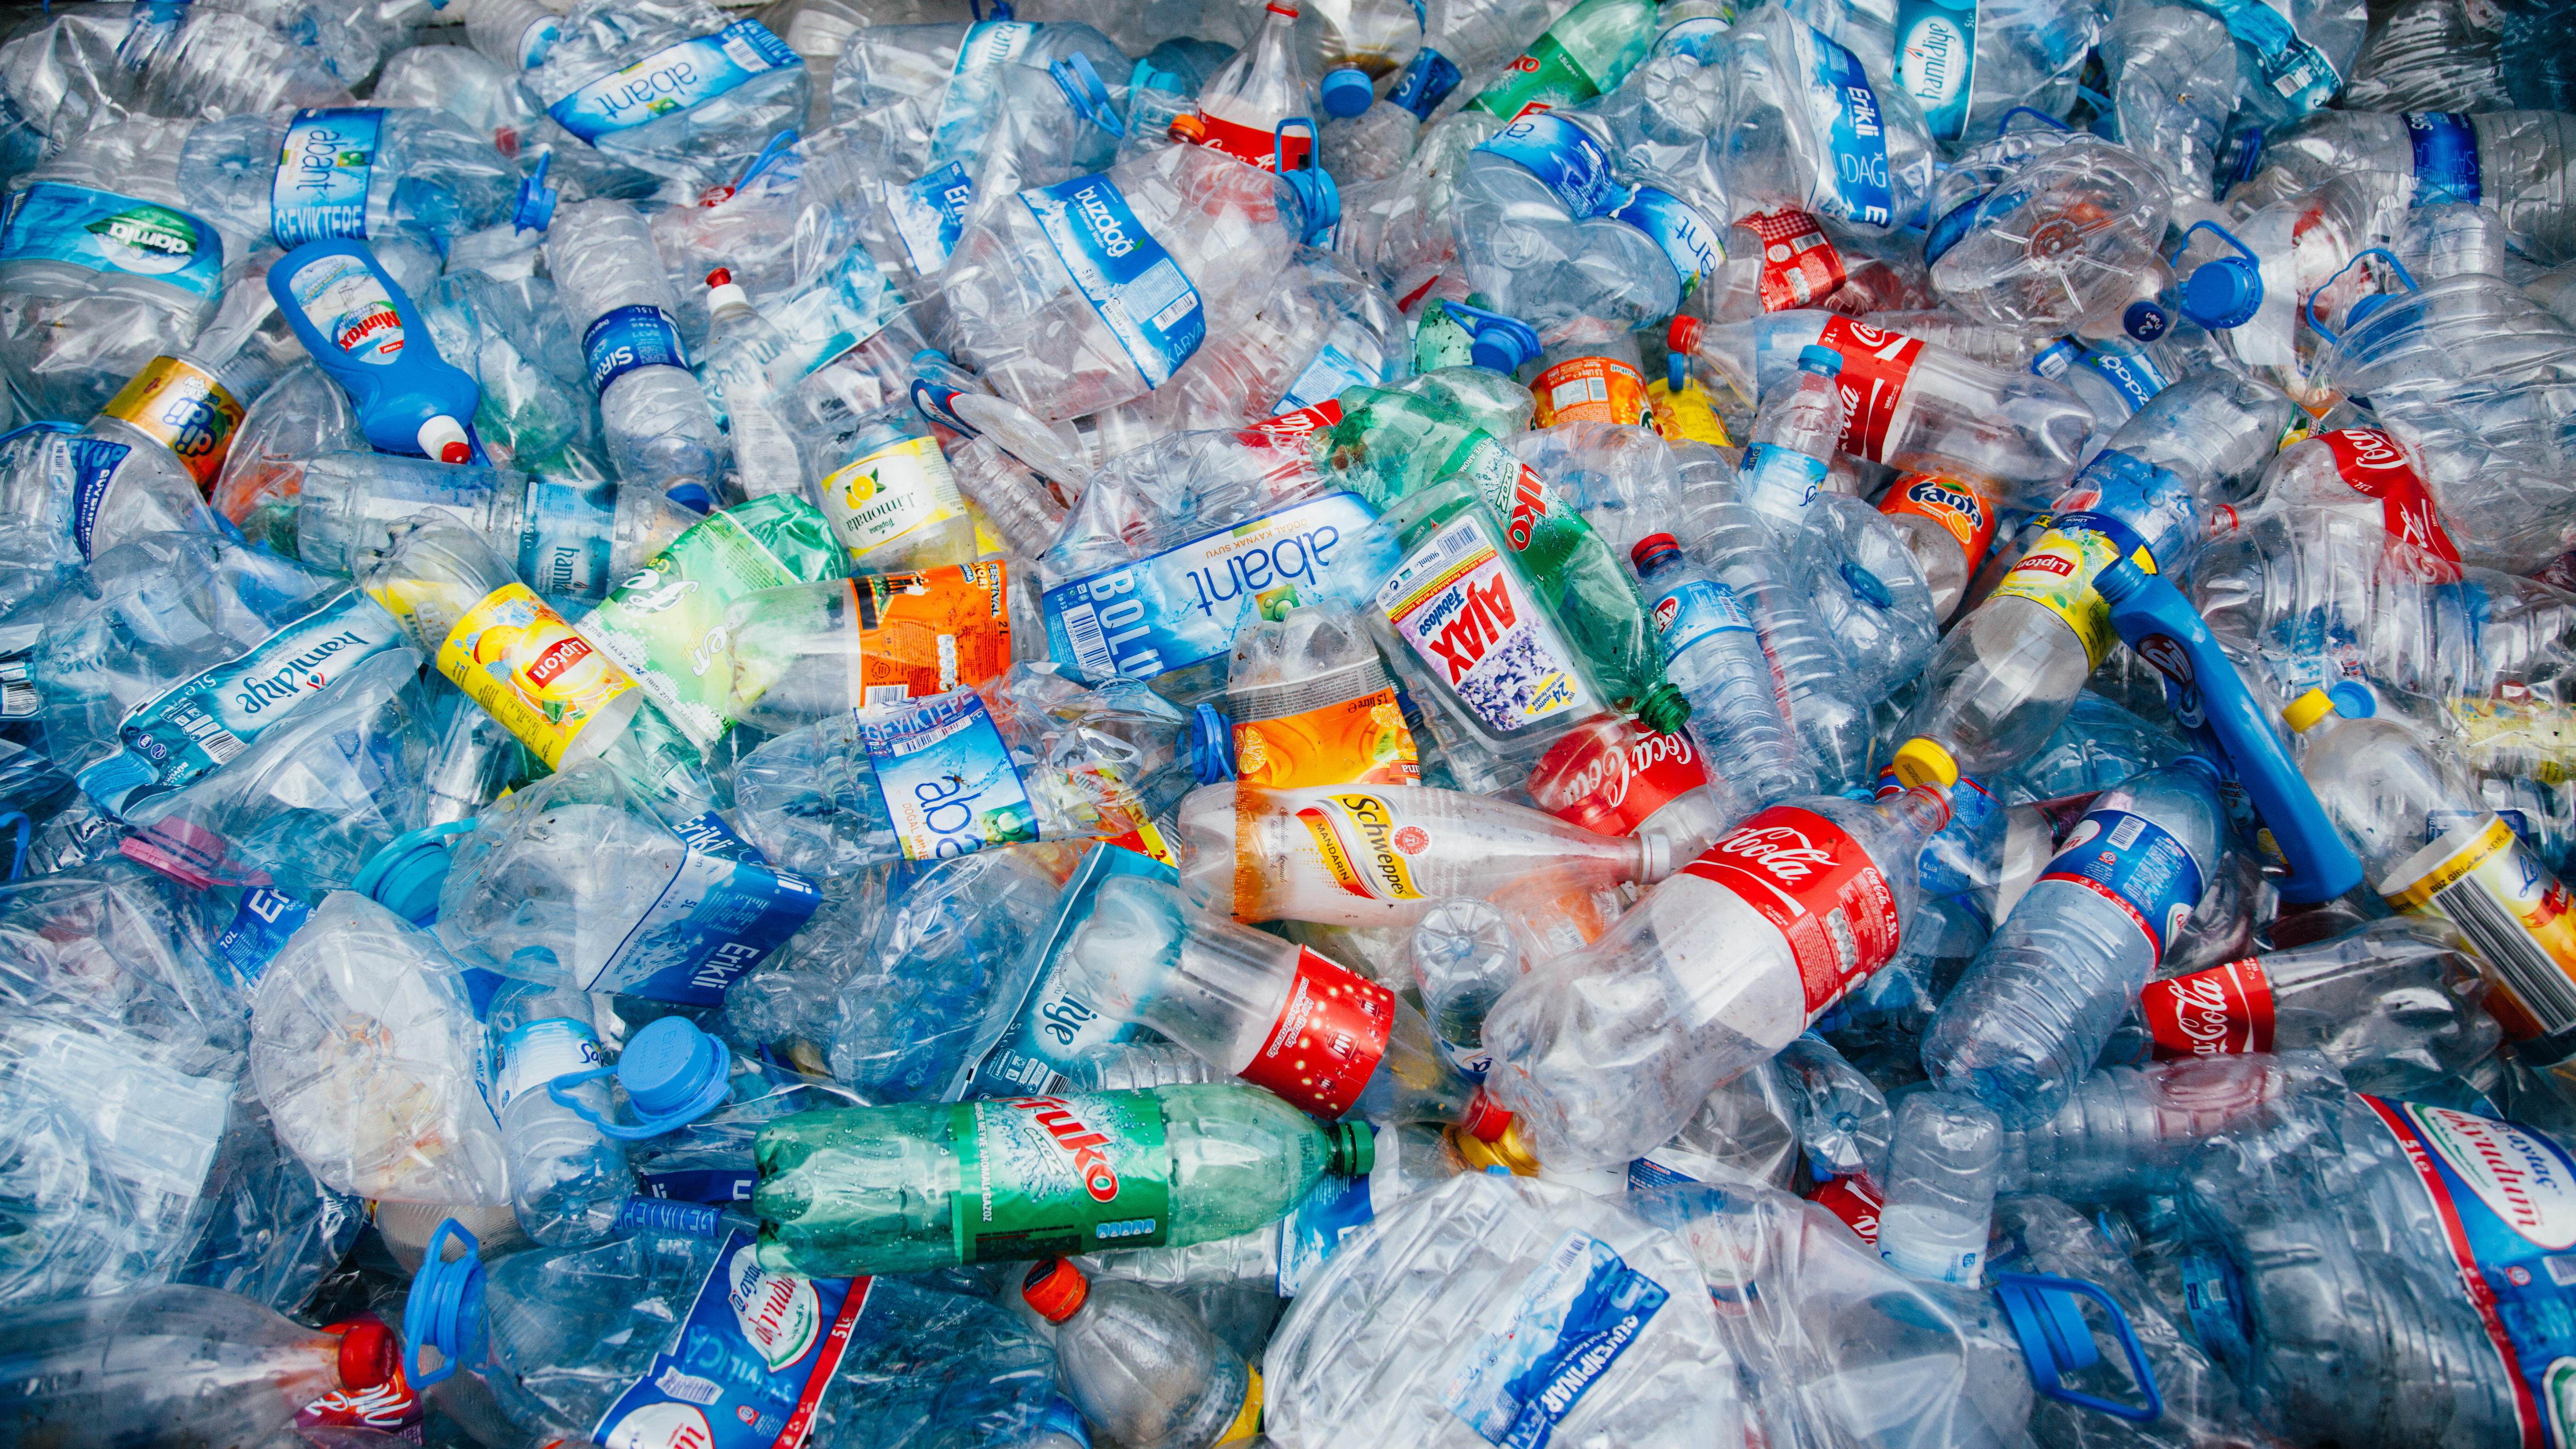 <strong>The scheme aims to prevent the use of tens of millions of disposable plastic water bottles a year&nbsp;</strong>